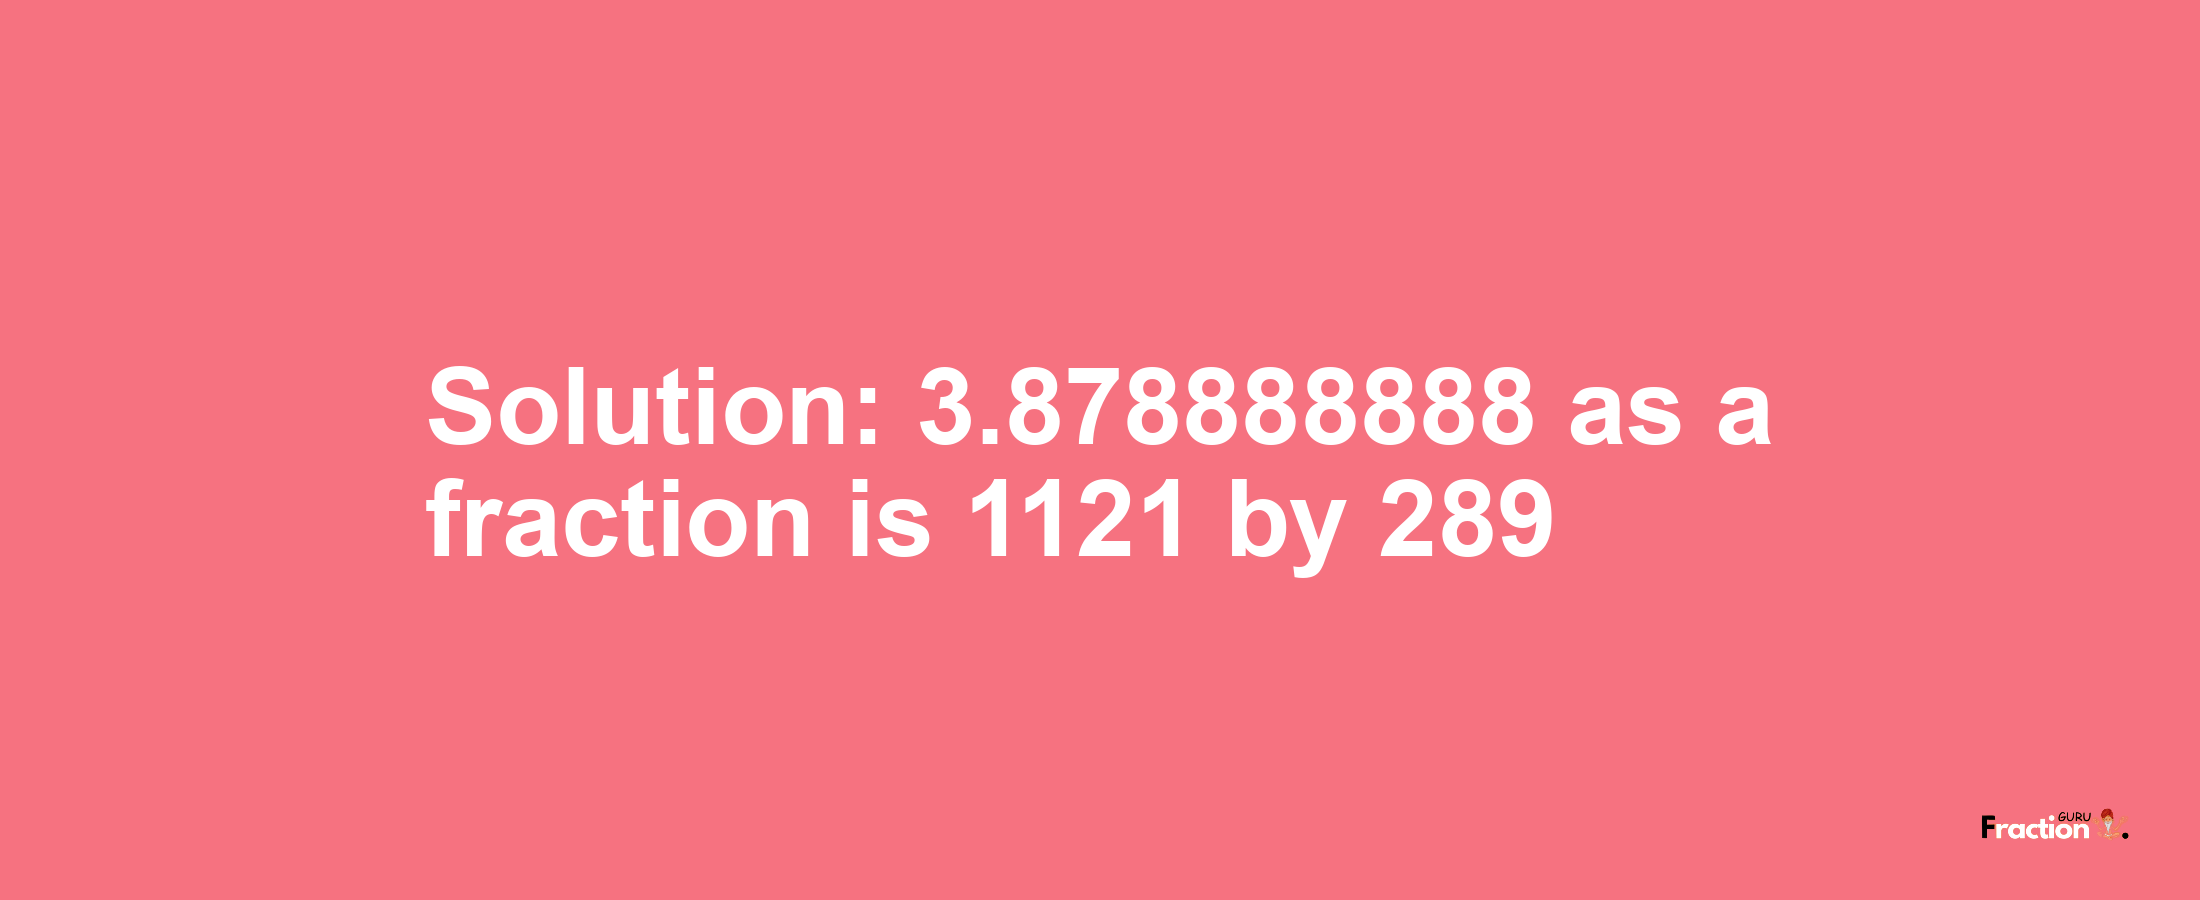 Solution:3.878888888 as a fraction is 1121/289